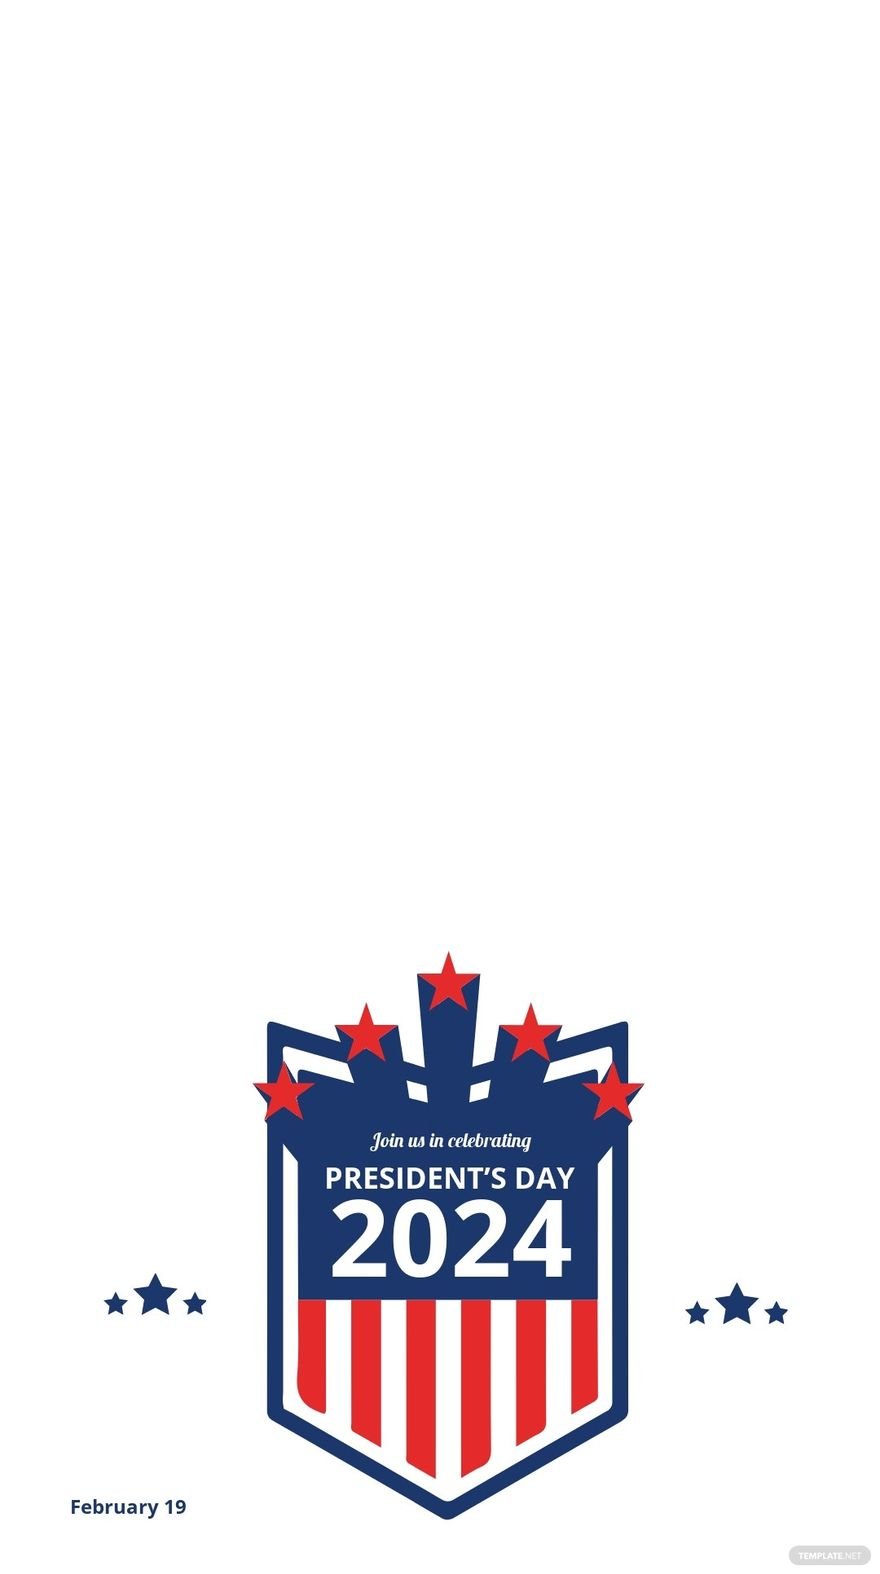 Presidents Day Event Snapchat Geofilter